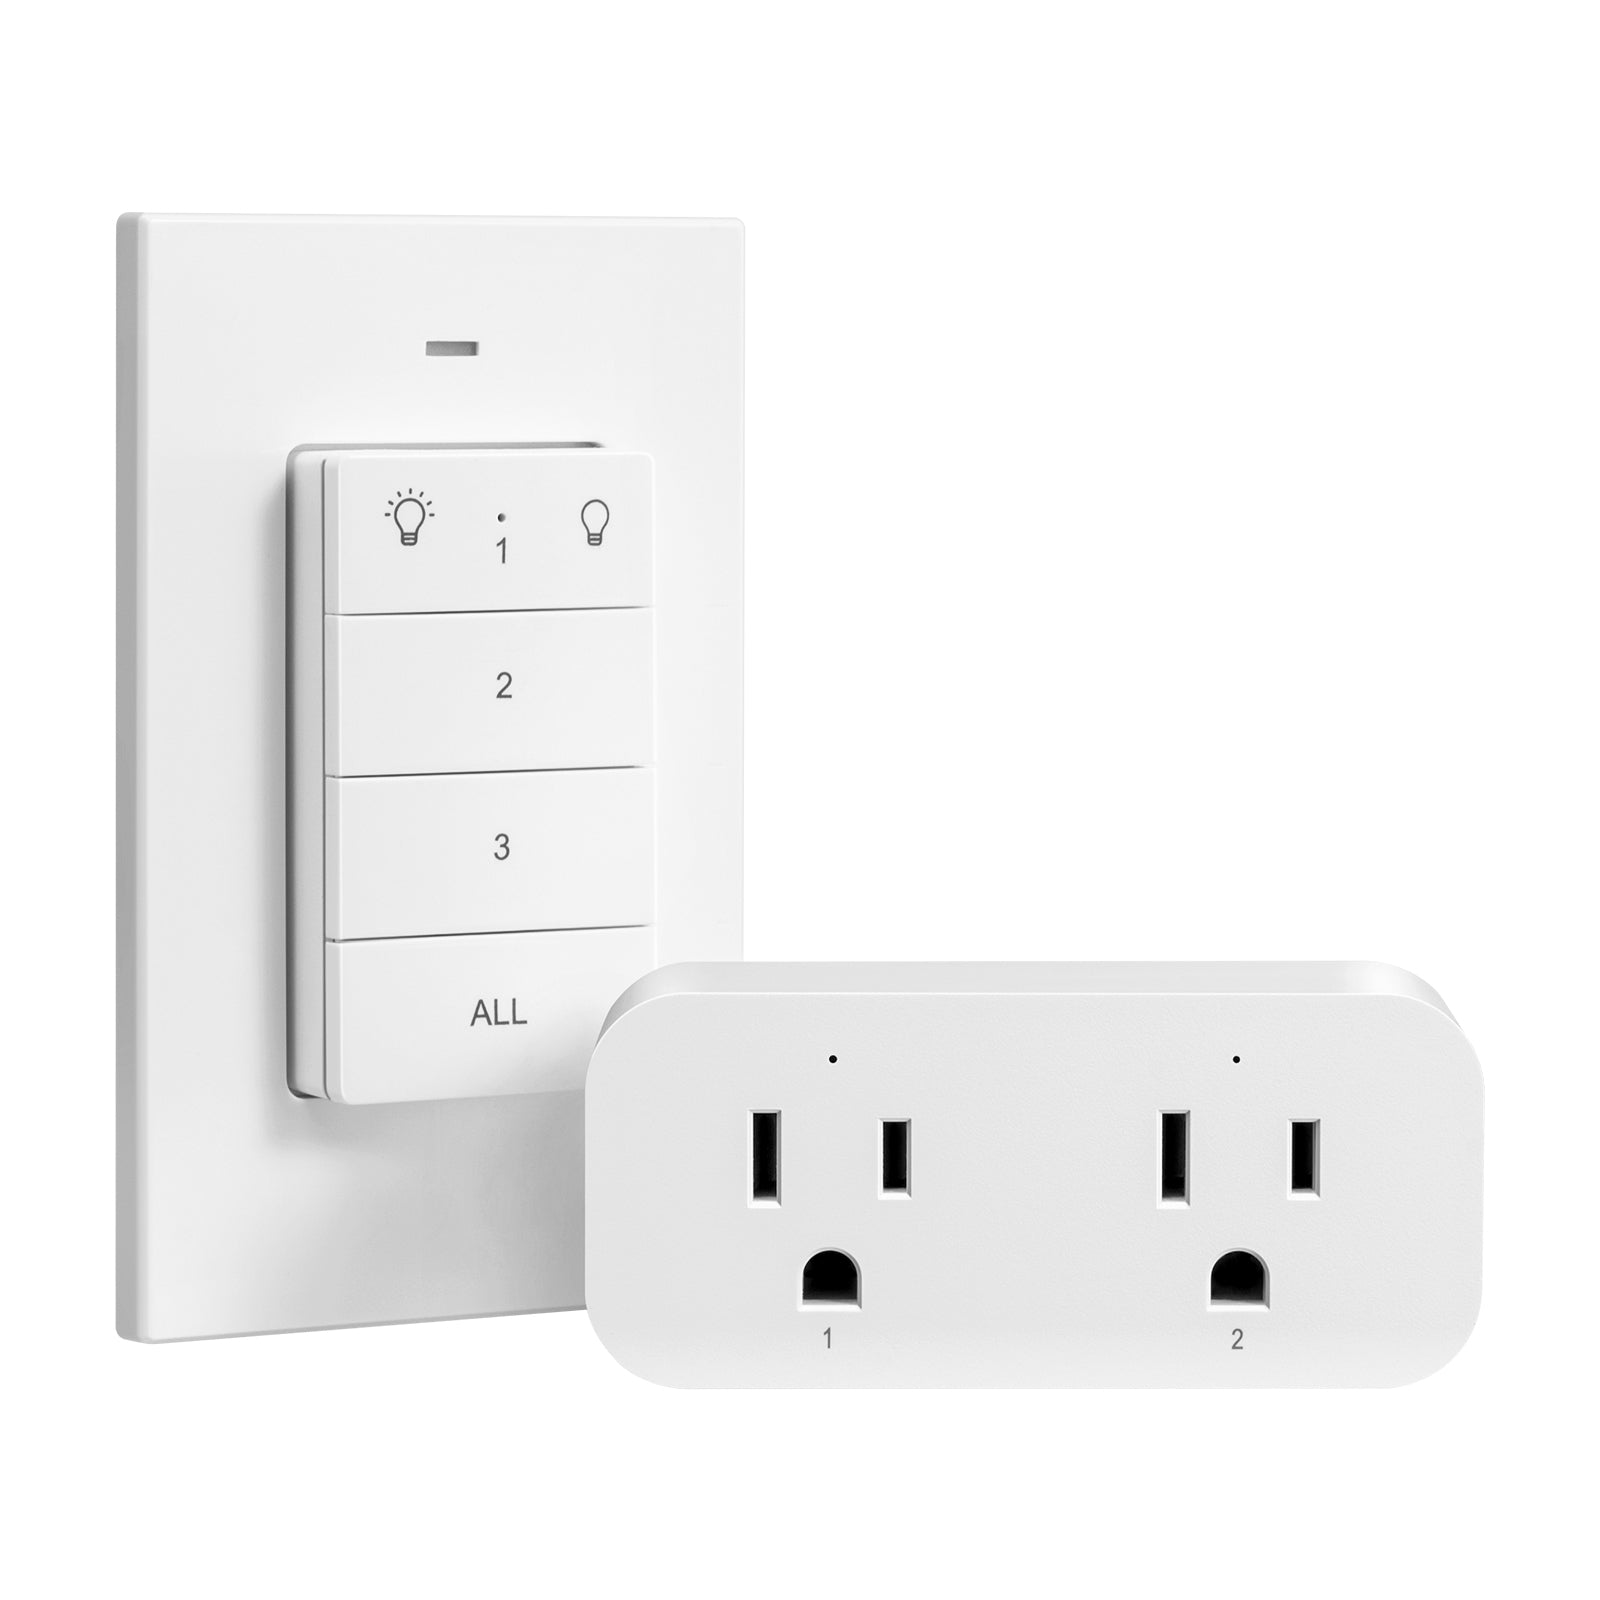 DEWENWILS Indoor Wireless Remote Control Outlet, Electrical Plug in on Off Power Switch, Wireless Wall Mounted Light Switch